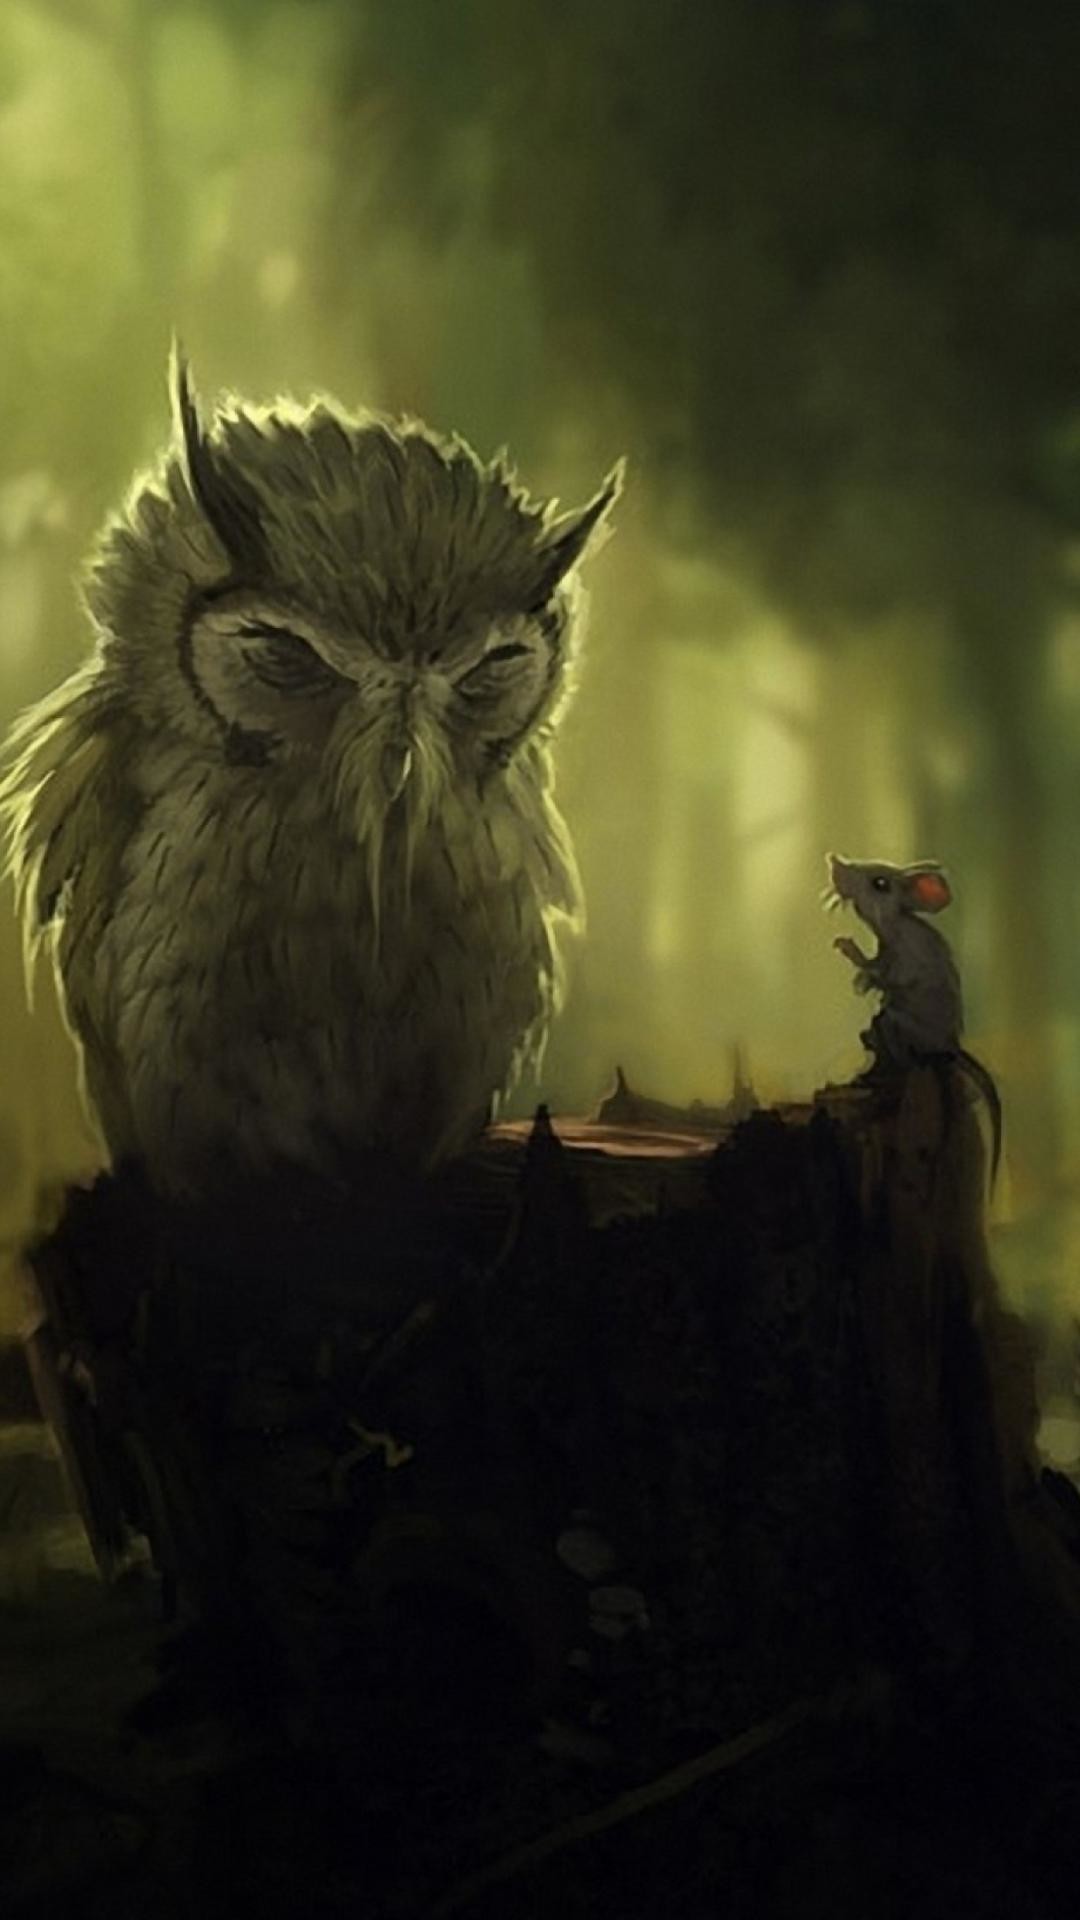 1080x1920 wallpaper.wiki-Cute-Owl-Wallpaper-Widescreen-for-Android-